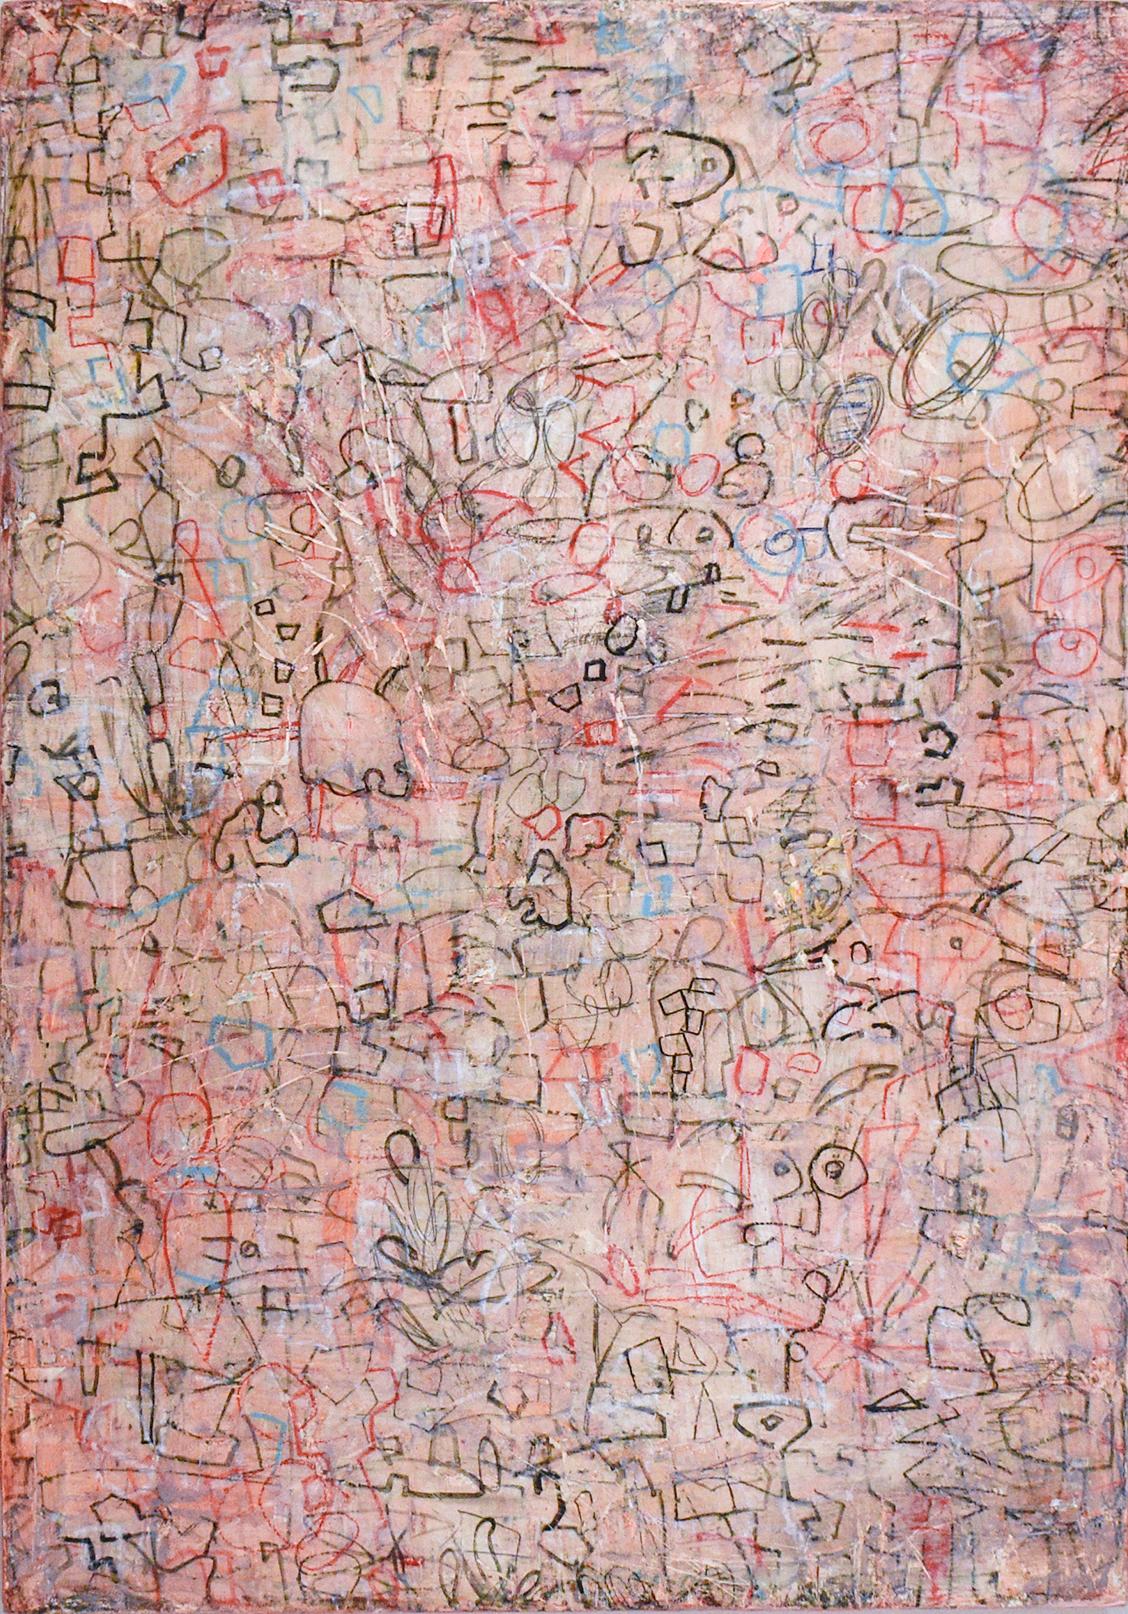 Drawing Conclusions (Abstract Expressionist Painting in the Style of Cy Twombly) - Mixed Media Art by Vincent Pomilio